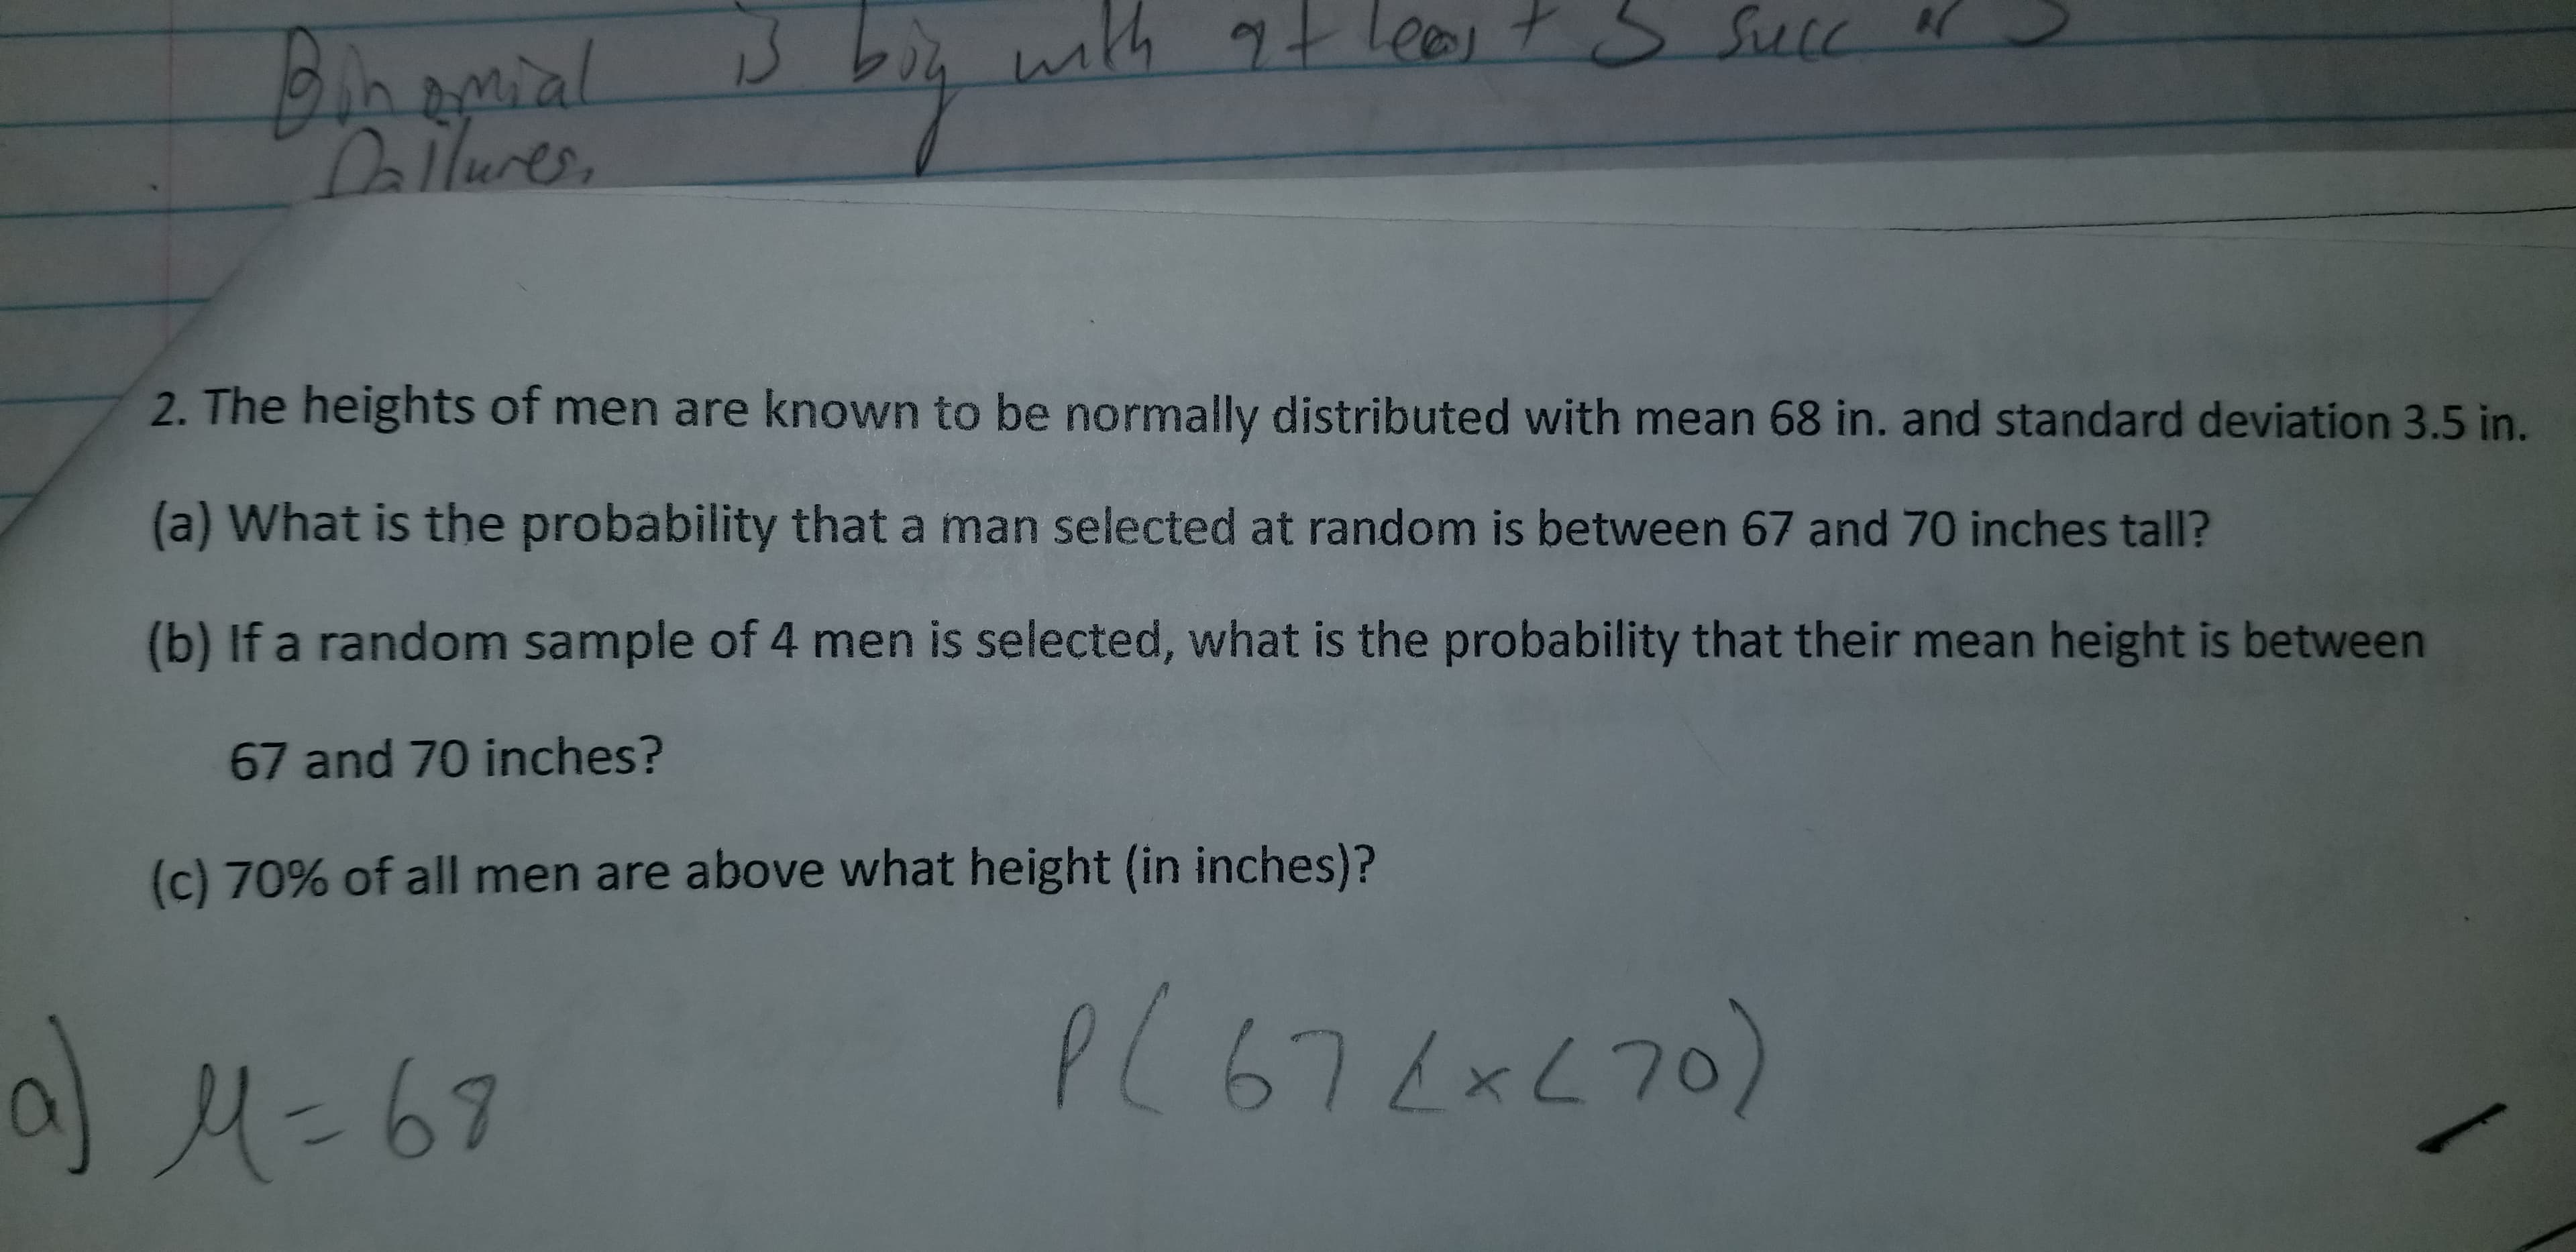 s Suce
with 9t leos t
Bhamial
Dallures,
2. The heights of men are known to be normally distributed with mean 68 in. and standard deviation 3.5 in.
(a) What is the probability that a man selected at random is between 67 and 70 inches tall?
(b) If a random sample of 4 men is selected, what is the probability that their mean height is between
67 and 70 inches?
(c) 70% of all men are above what height (in inches)?
P(67exL70)
676xL7
M=67
